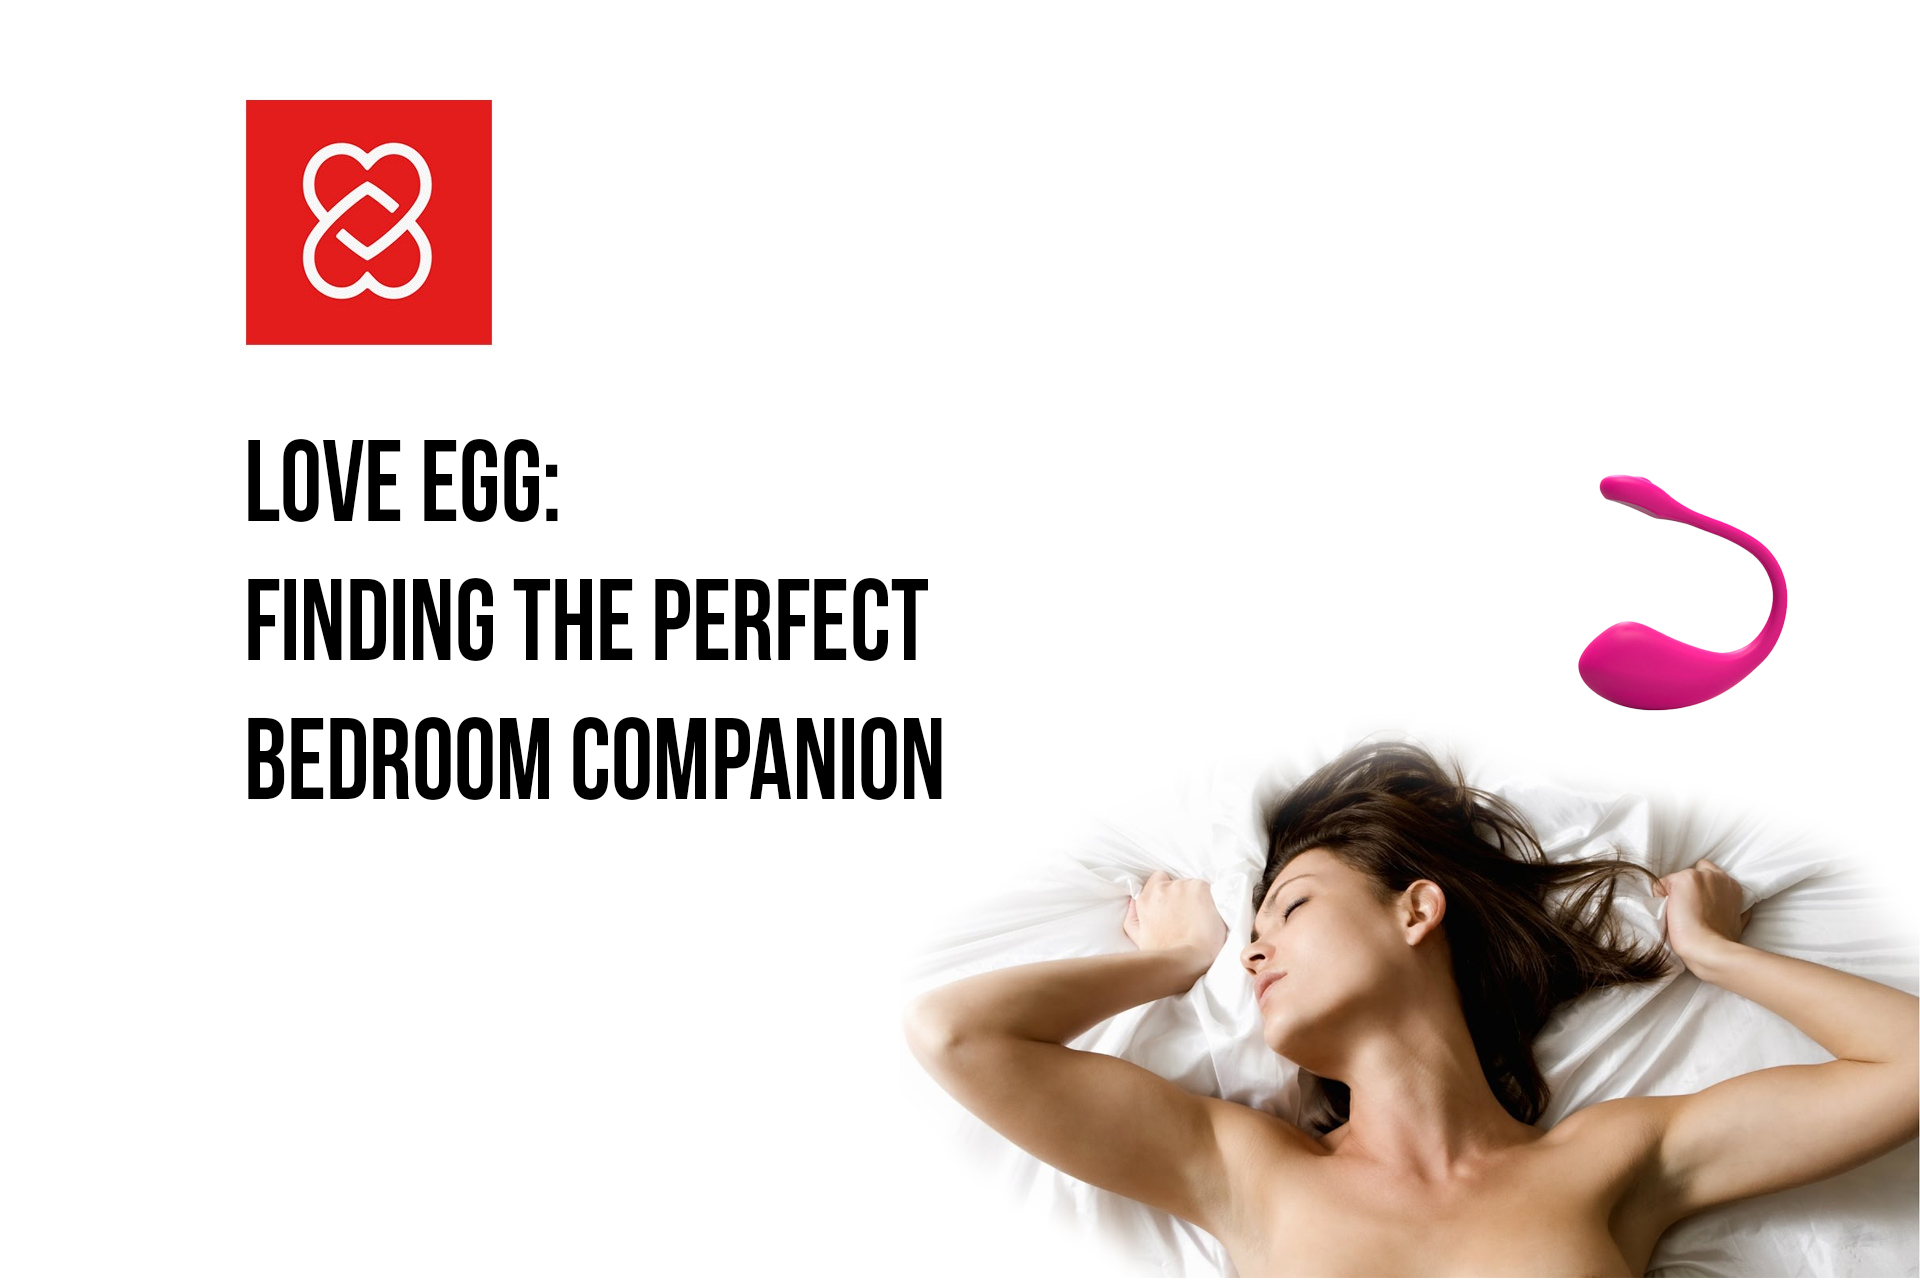 Love Egg: Finding The Perfect Bedroom Companion